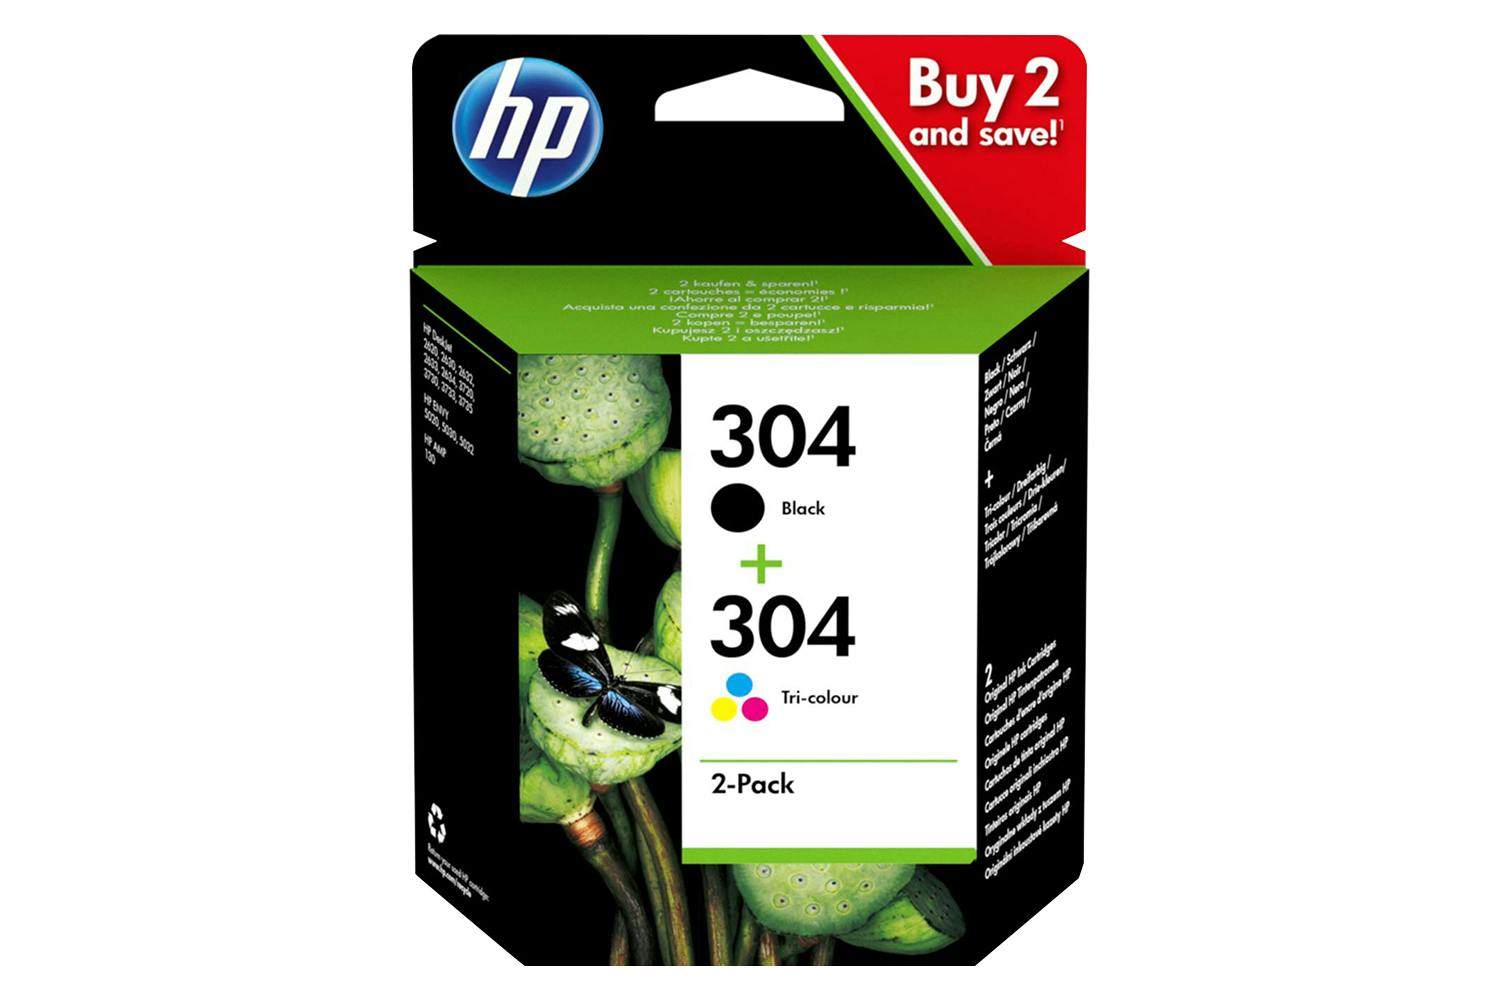 HP 963XL / 963 Ink Cartridge Multipack - Compatible, Shop Today. Get it  Tomorrow!